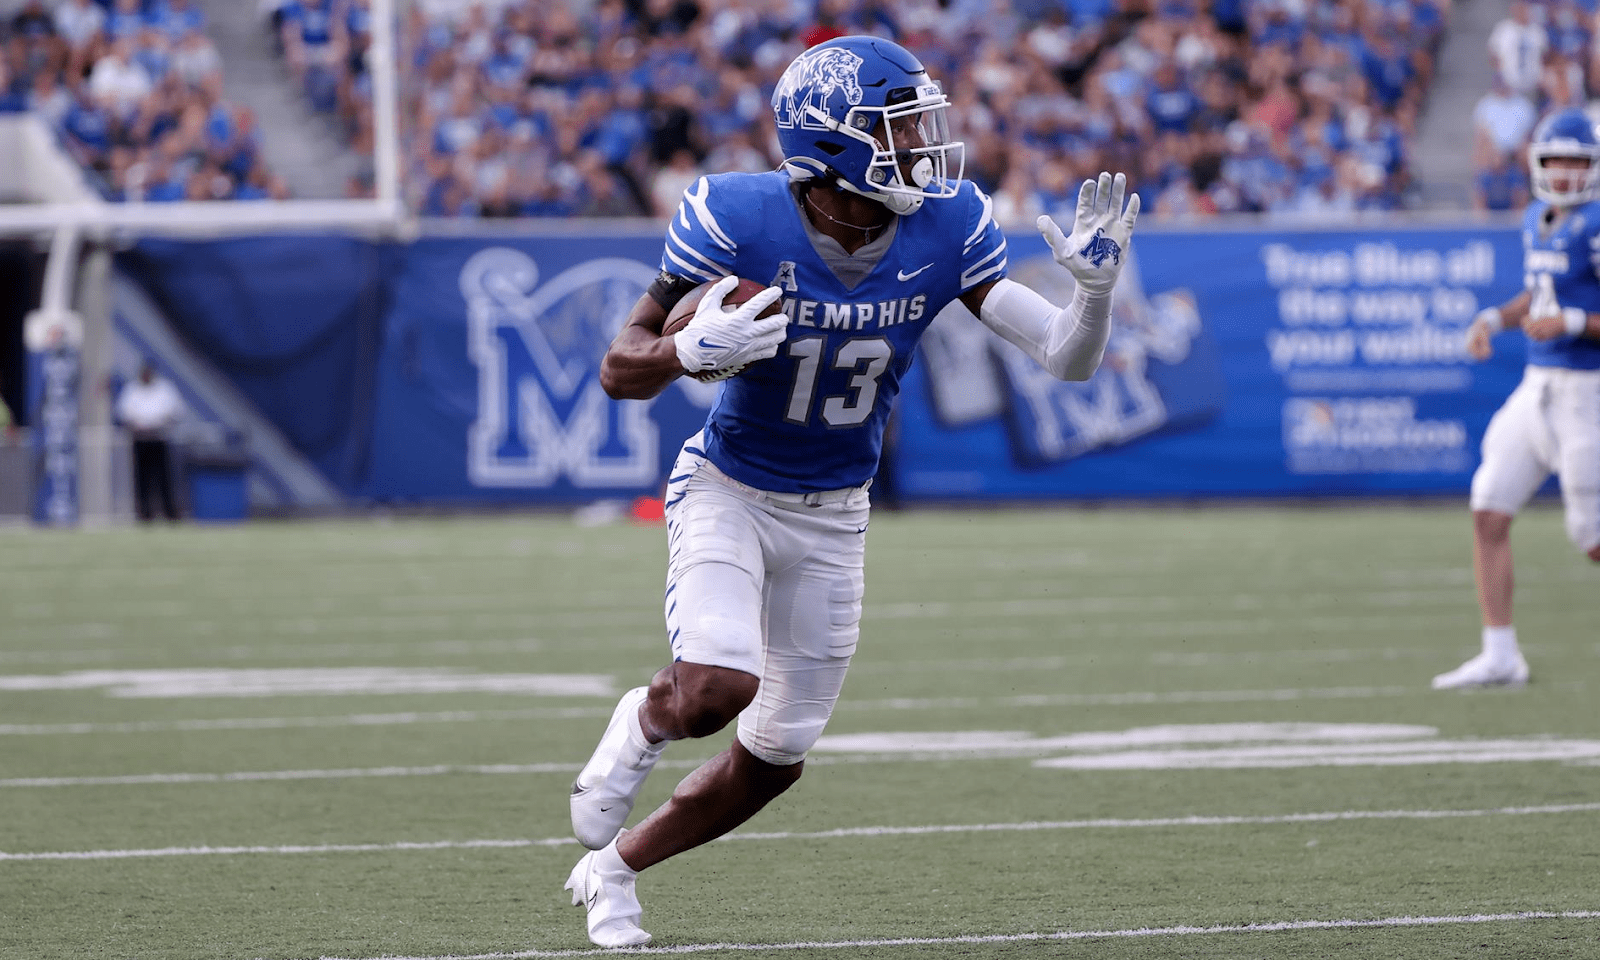 Former Clarke County HS athlete Javon Ivory recently transferred from to South Alabama from Memphis. Coming closer to home, he hopes to have a breakout season. Hula Bowl scout Victor Horn breaks down Ivory as an NFL Prospect in his report.